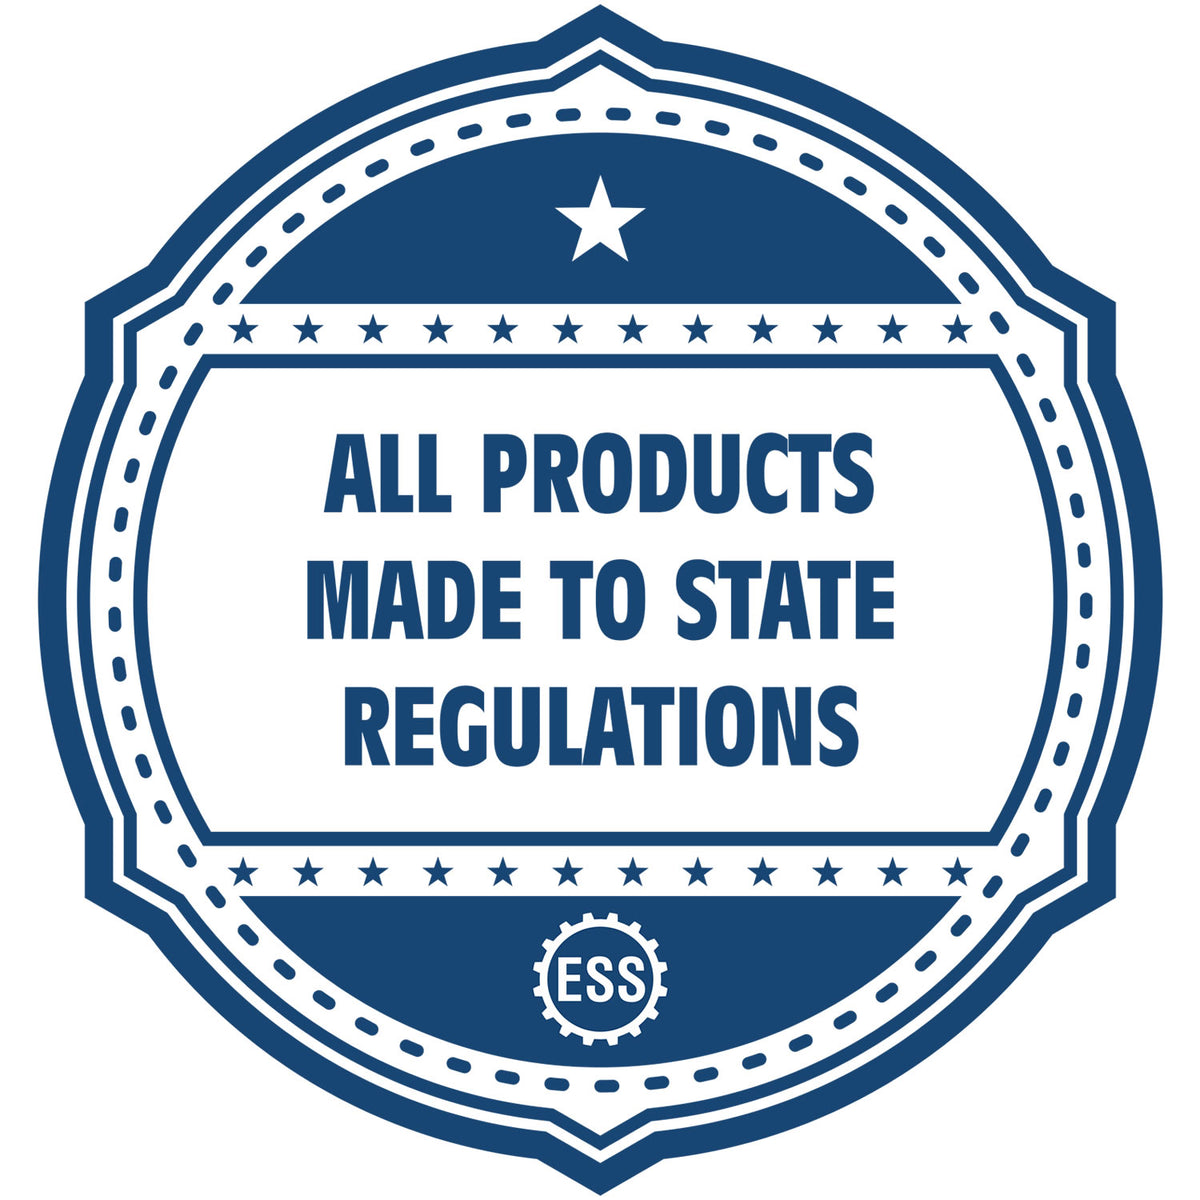 A blue icon or badge for the State of Maine Extended Long Reach Geologist Seal showing that this product is made in compliance with state regulations.